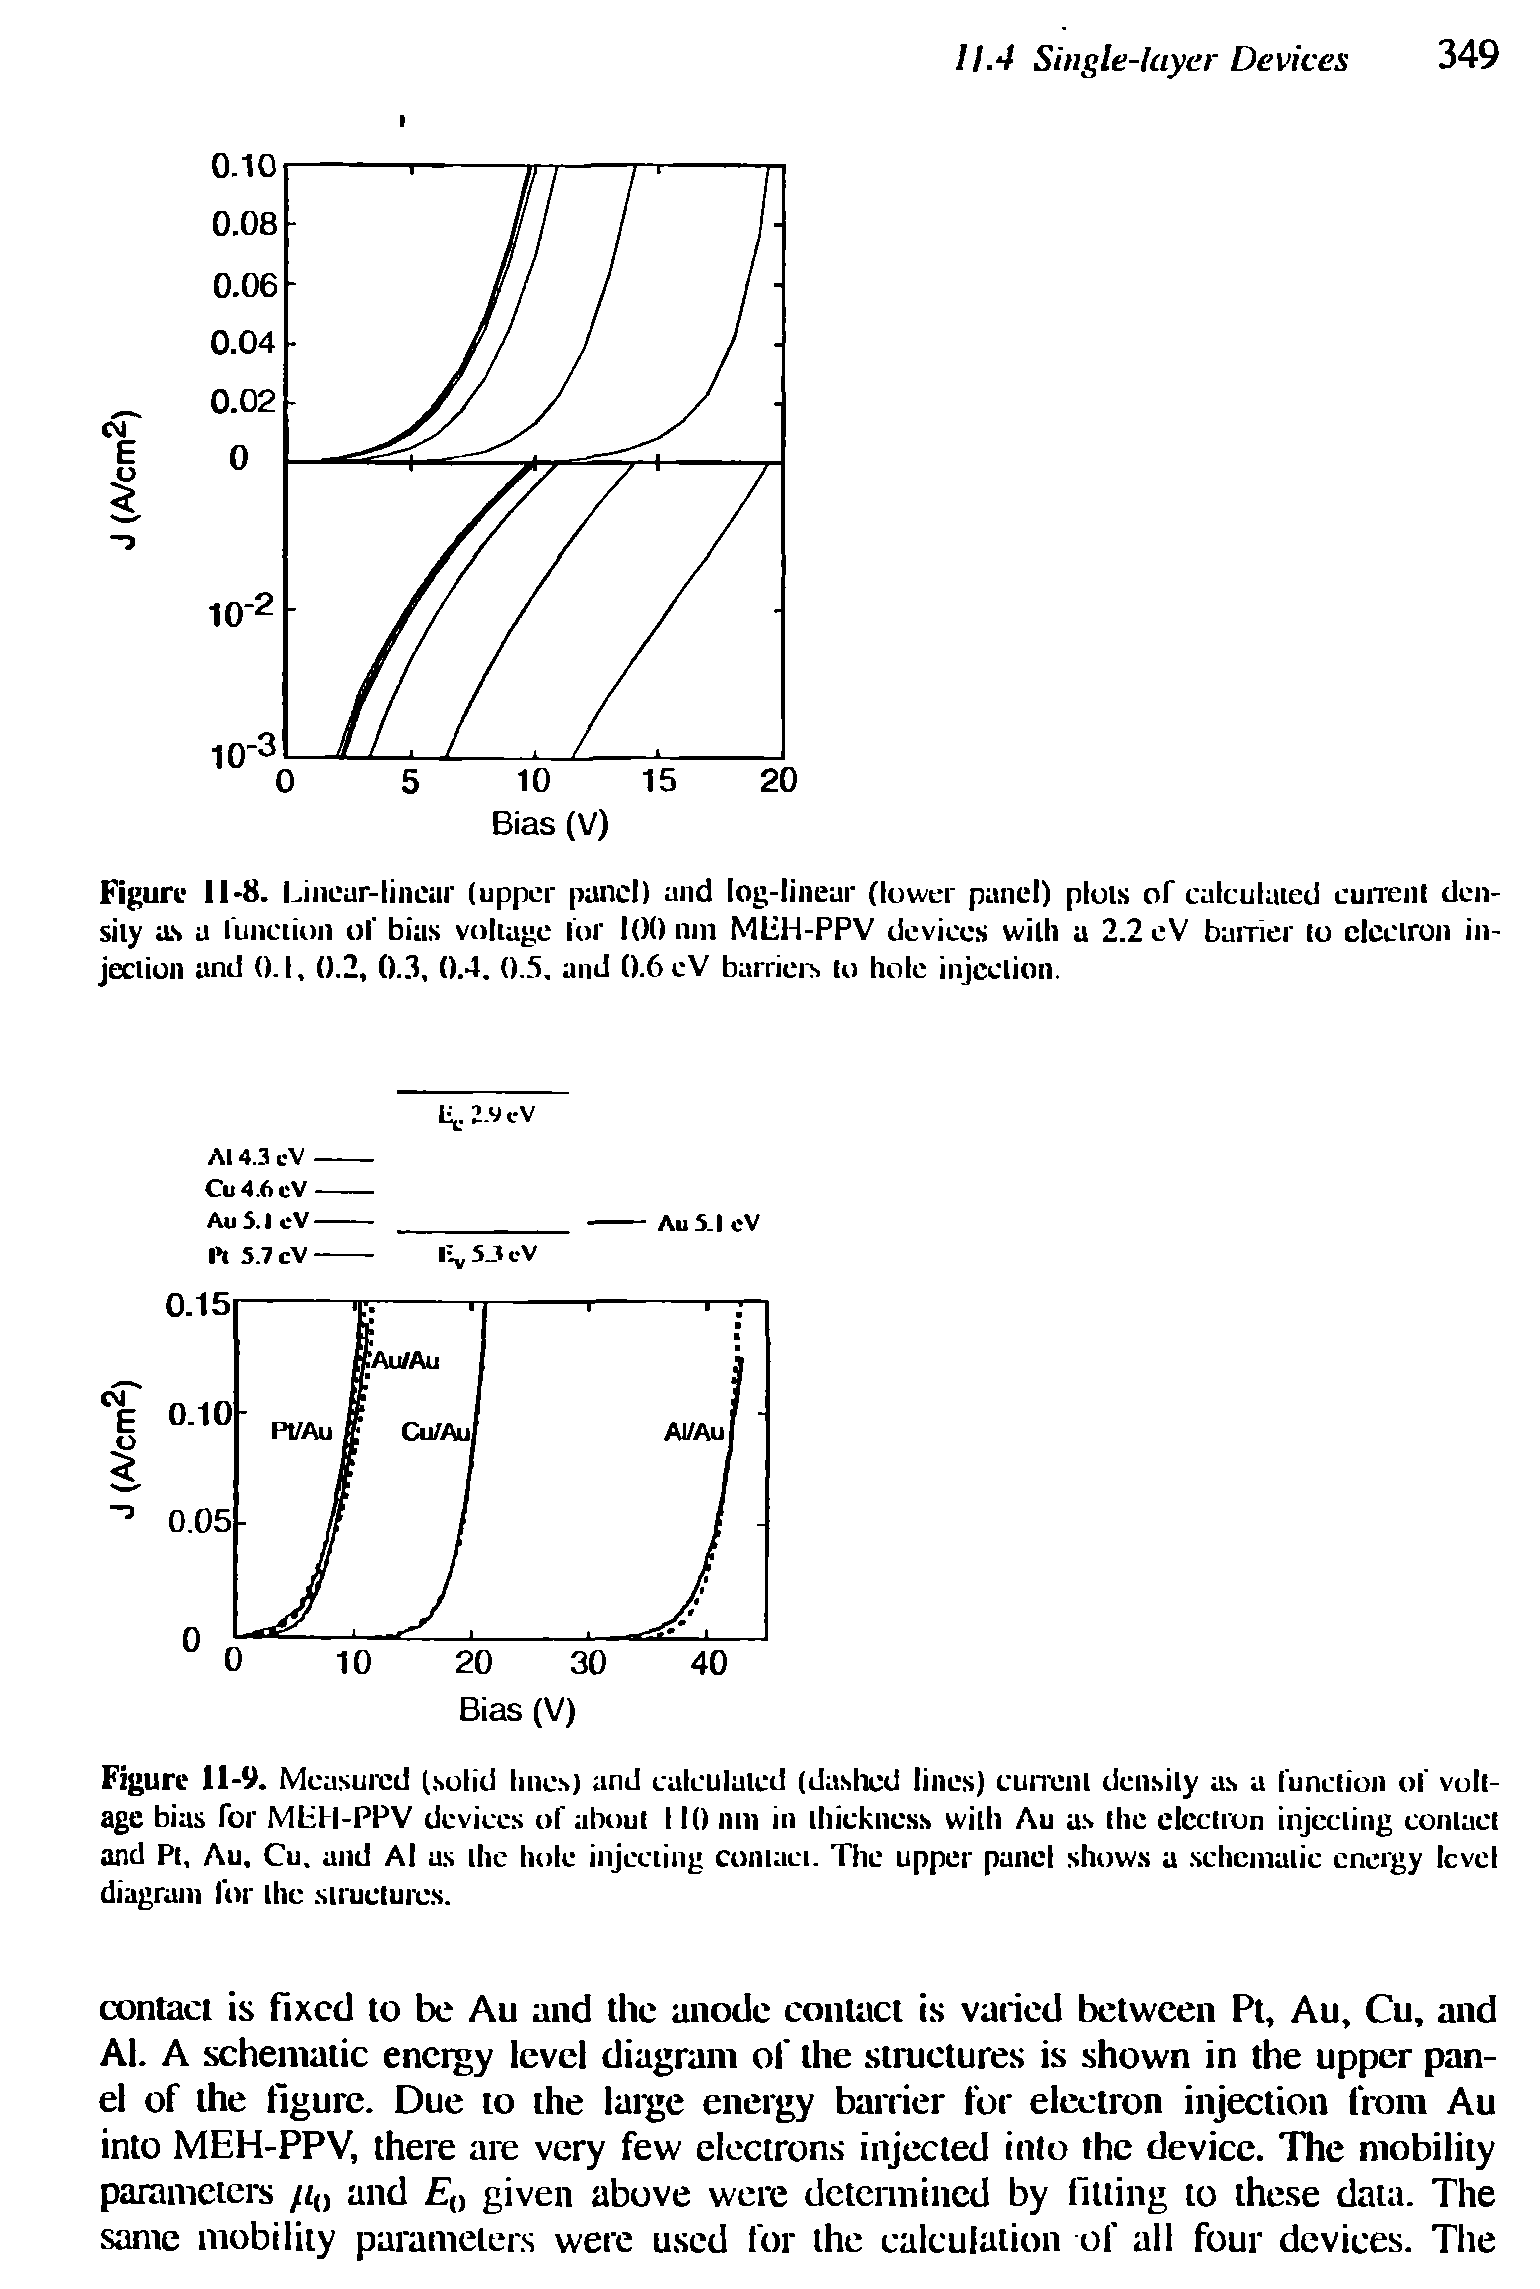 Figure 11-9. Measured (solid lines) and calculated (dashed lines) current density us a (unction o( voltage bias for MBH-PPV devices o( about 110 nut in thickness with Au us the electron injecting contact and Pt, Au, Cu. and Al us the hole injecting contact. The upper panel shows a schematic energy level diagram for the structures.